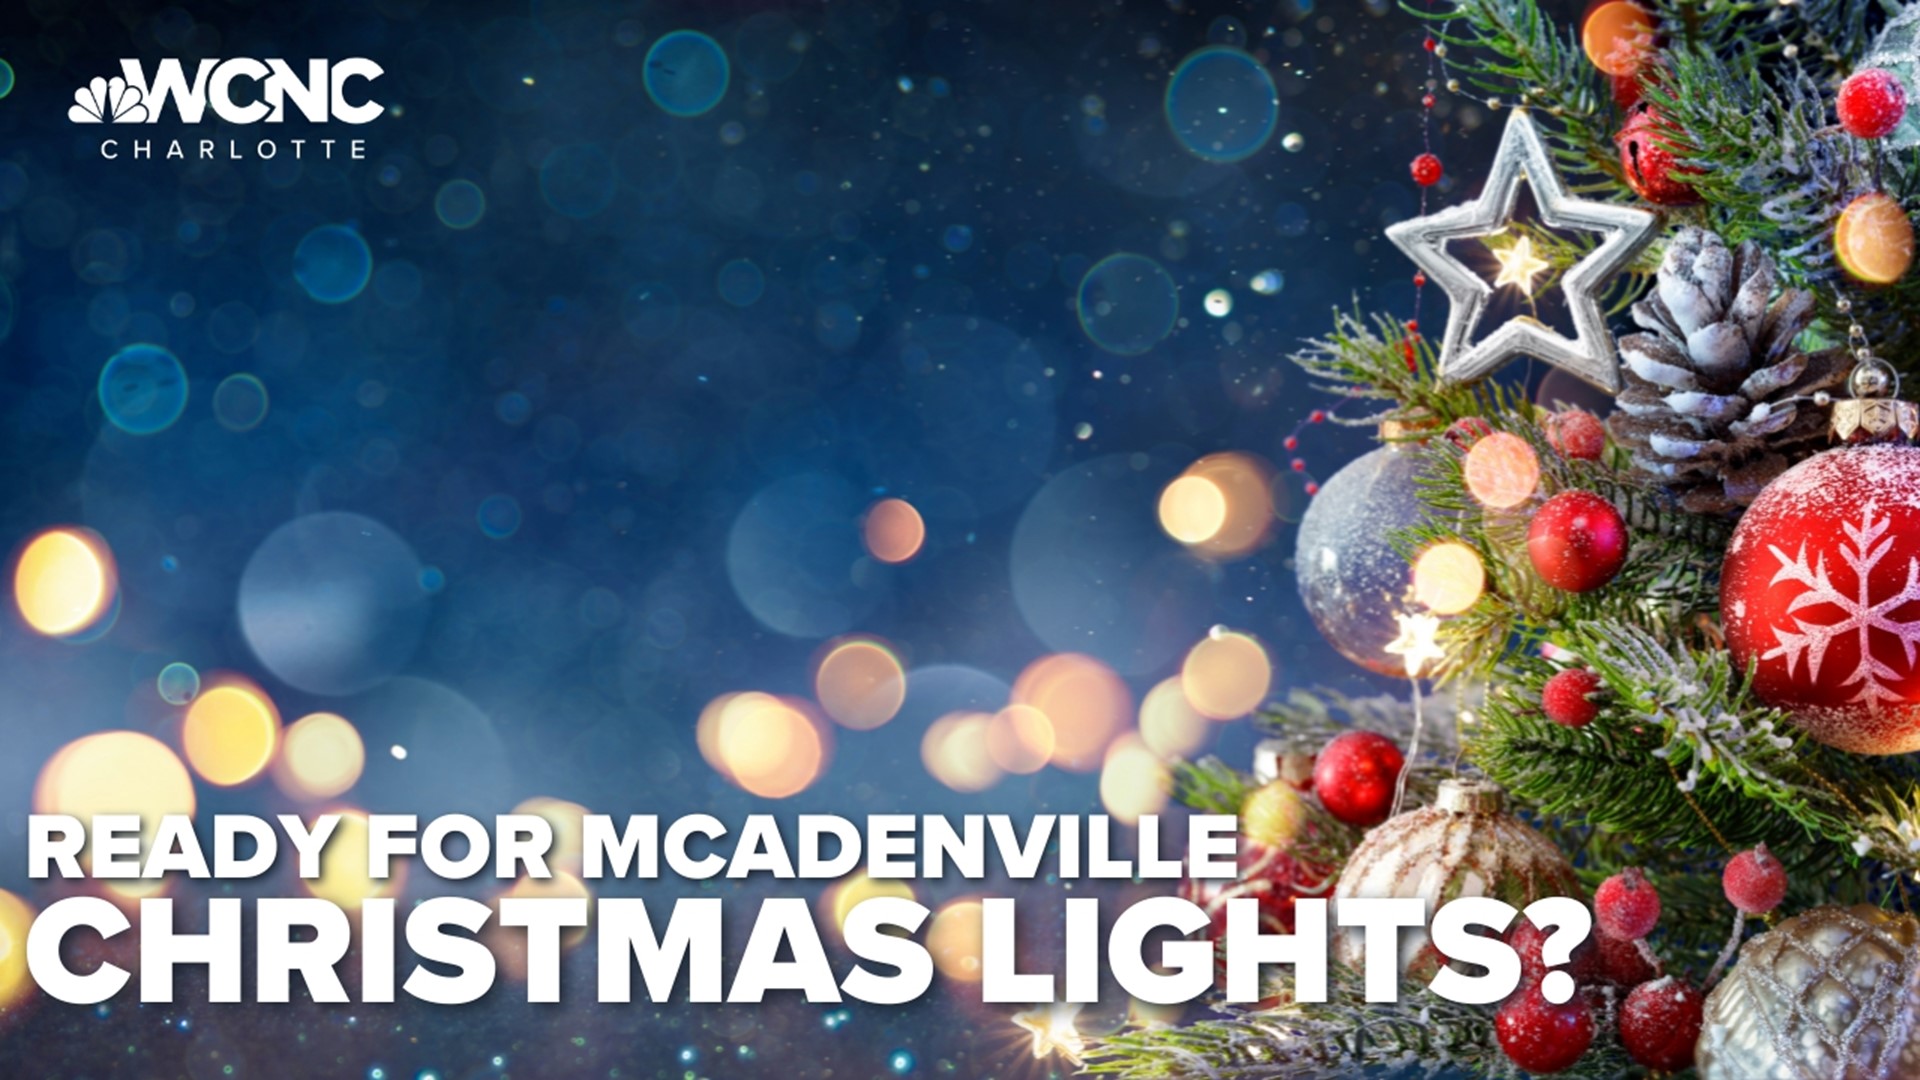 McAdenville is expecting more than 600,000 visitors this year.